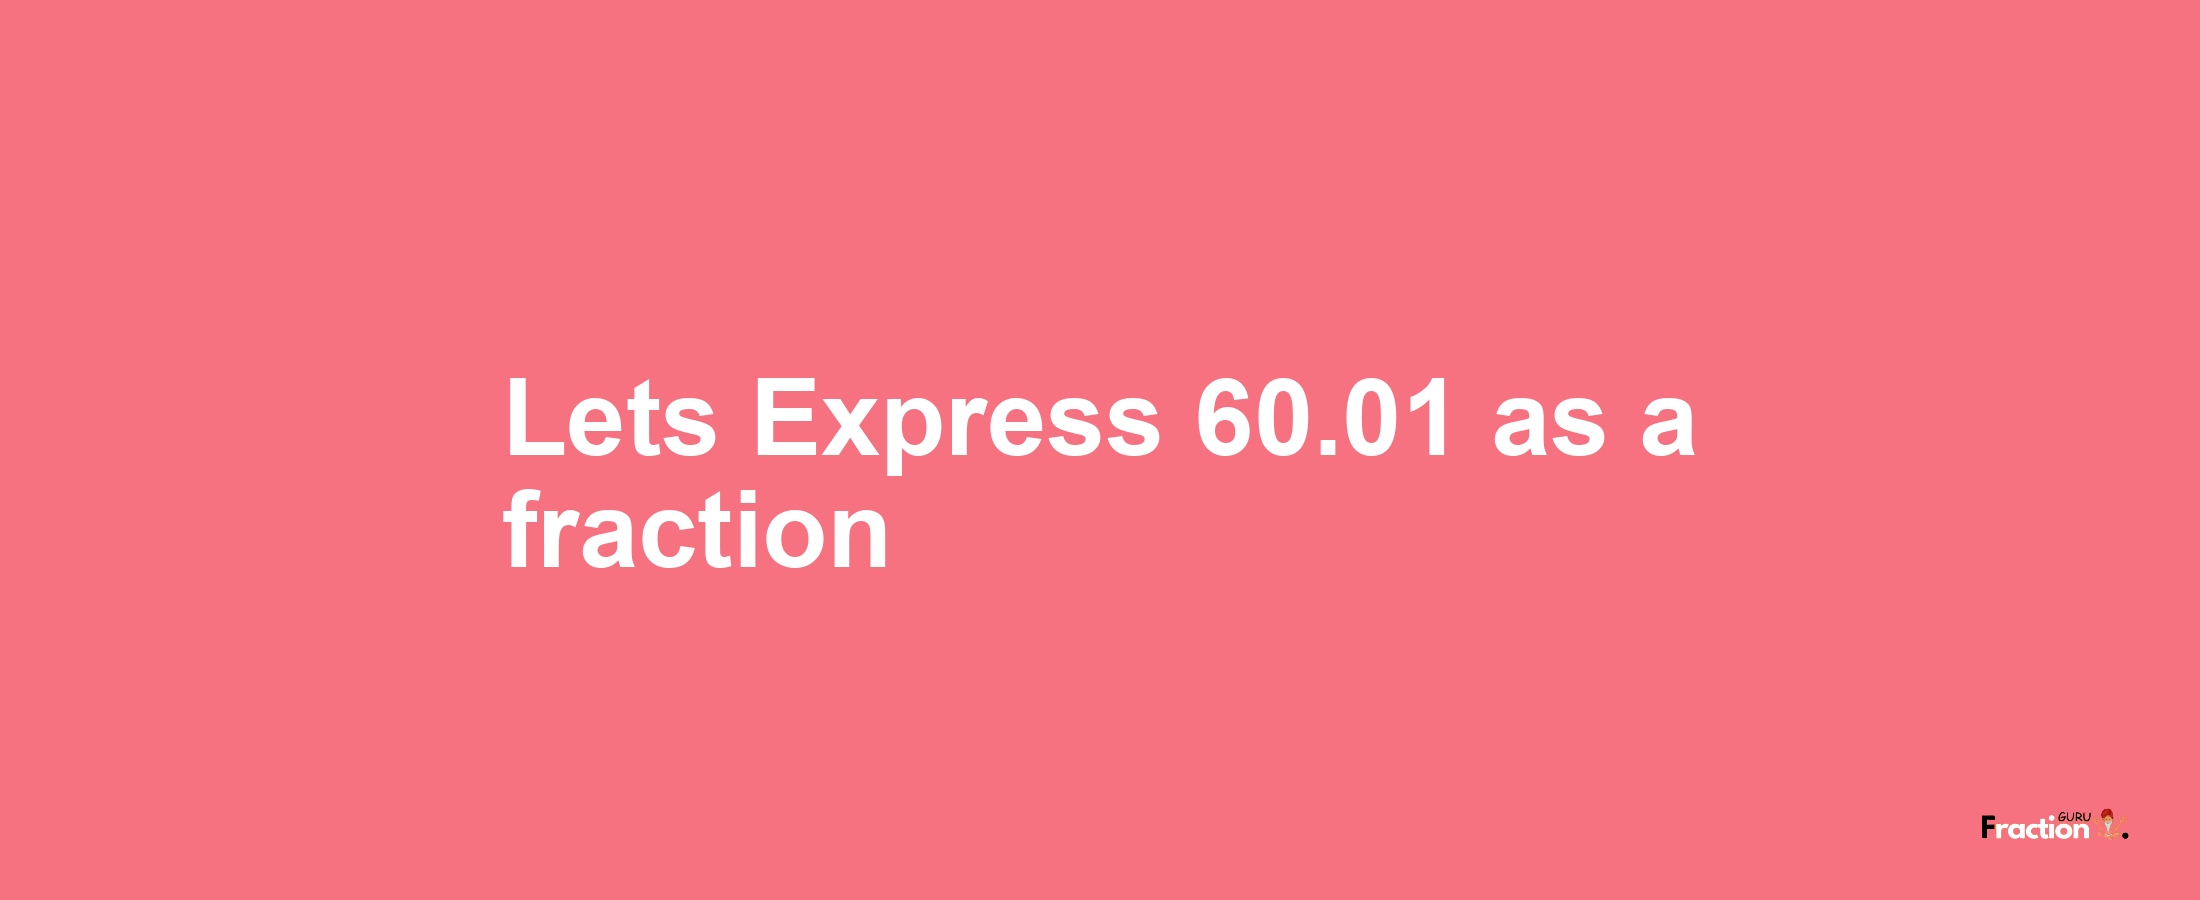 Lets Express 60.01 as afraction